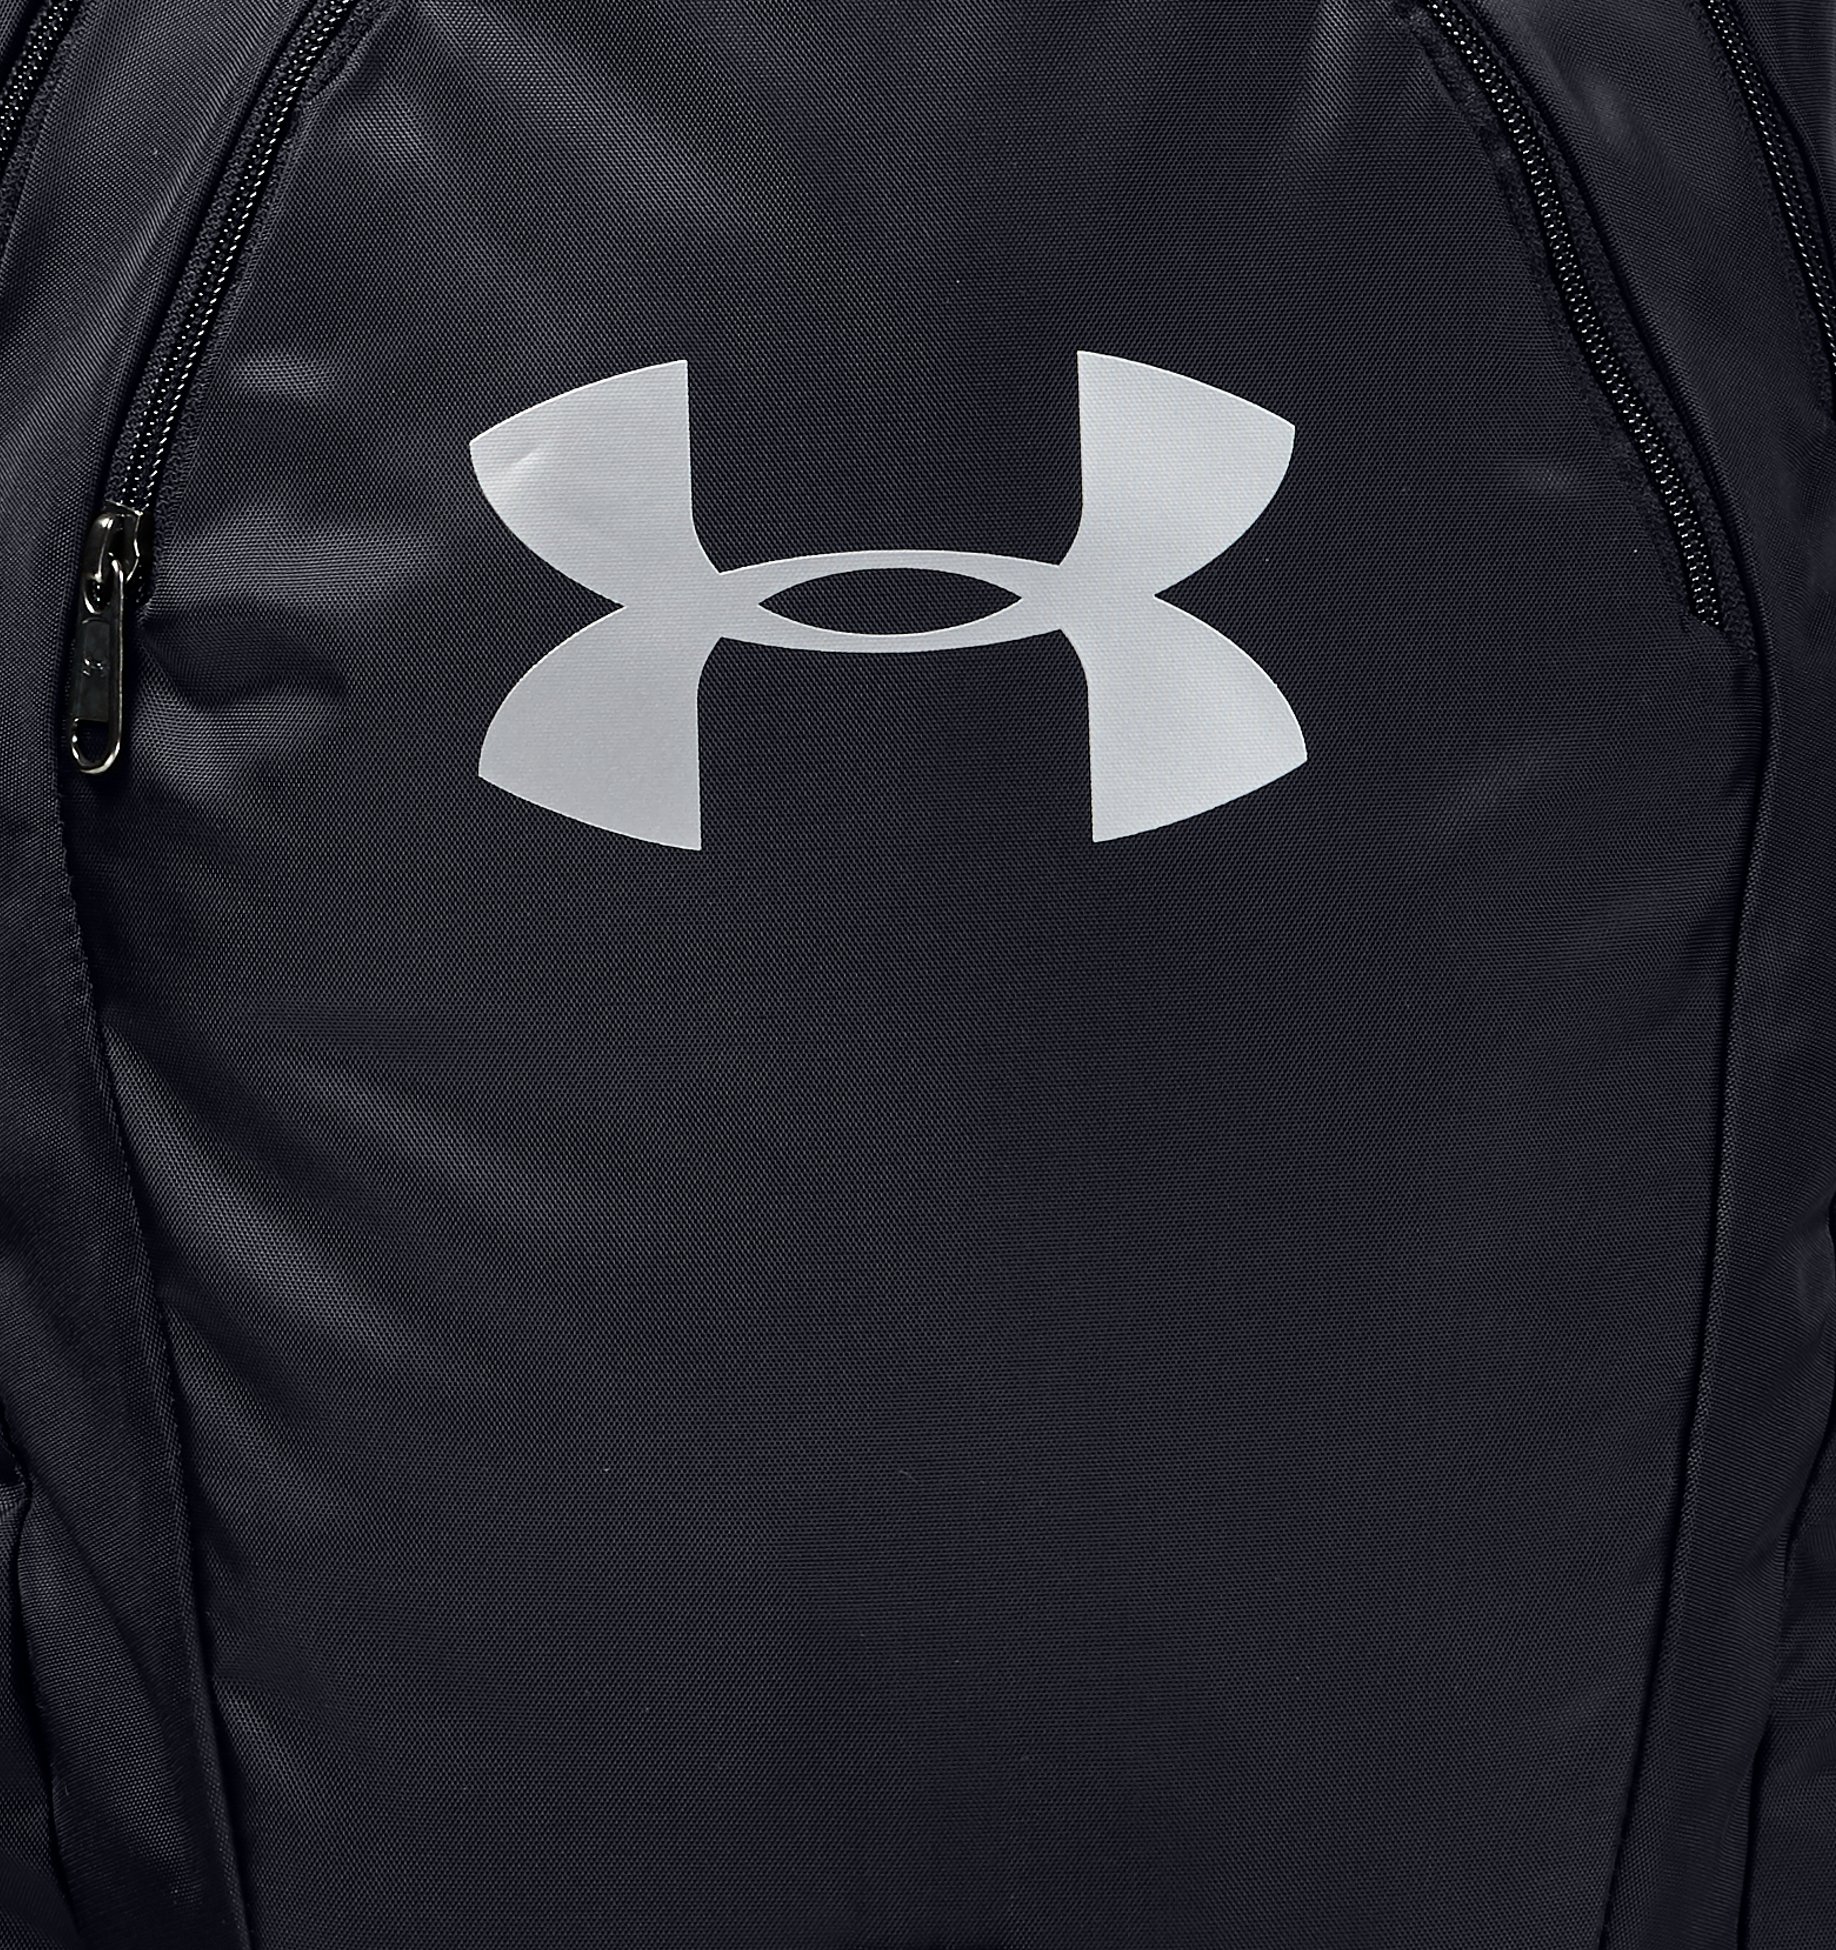 Under Armour Notre Dame Fighting Irish Undeniable Drawstring Backpack